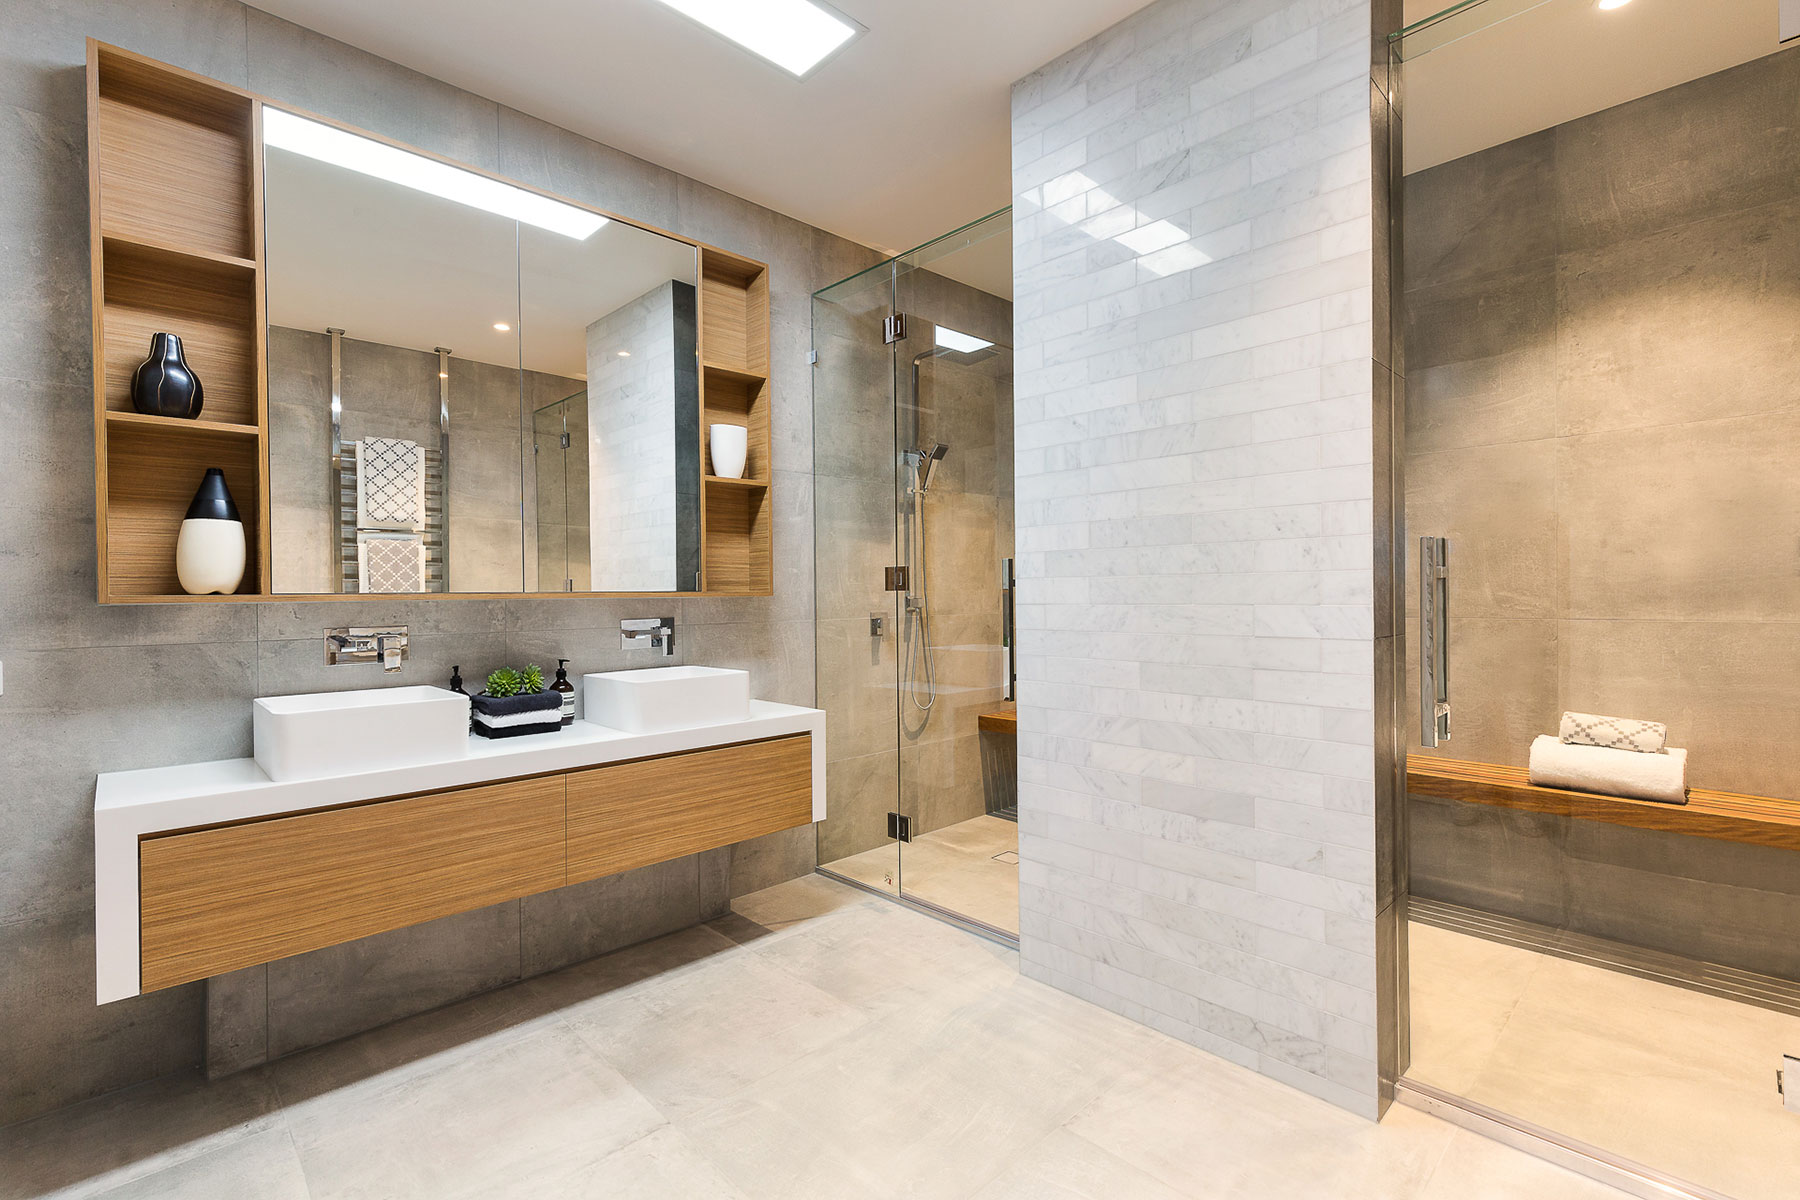 - Home Improvement Contractors in PA -  - Explore our Blog: Ault Signature Homes for Home Renovations - Home Improvement Contractors in PA -  - Remodeling Services: Unleash Property Potential with Us bathroom